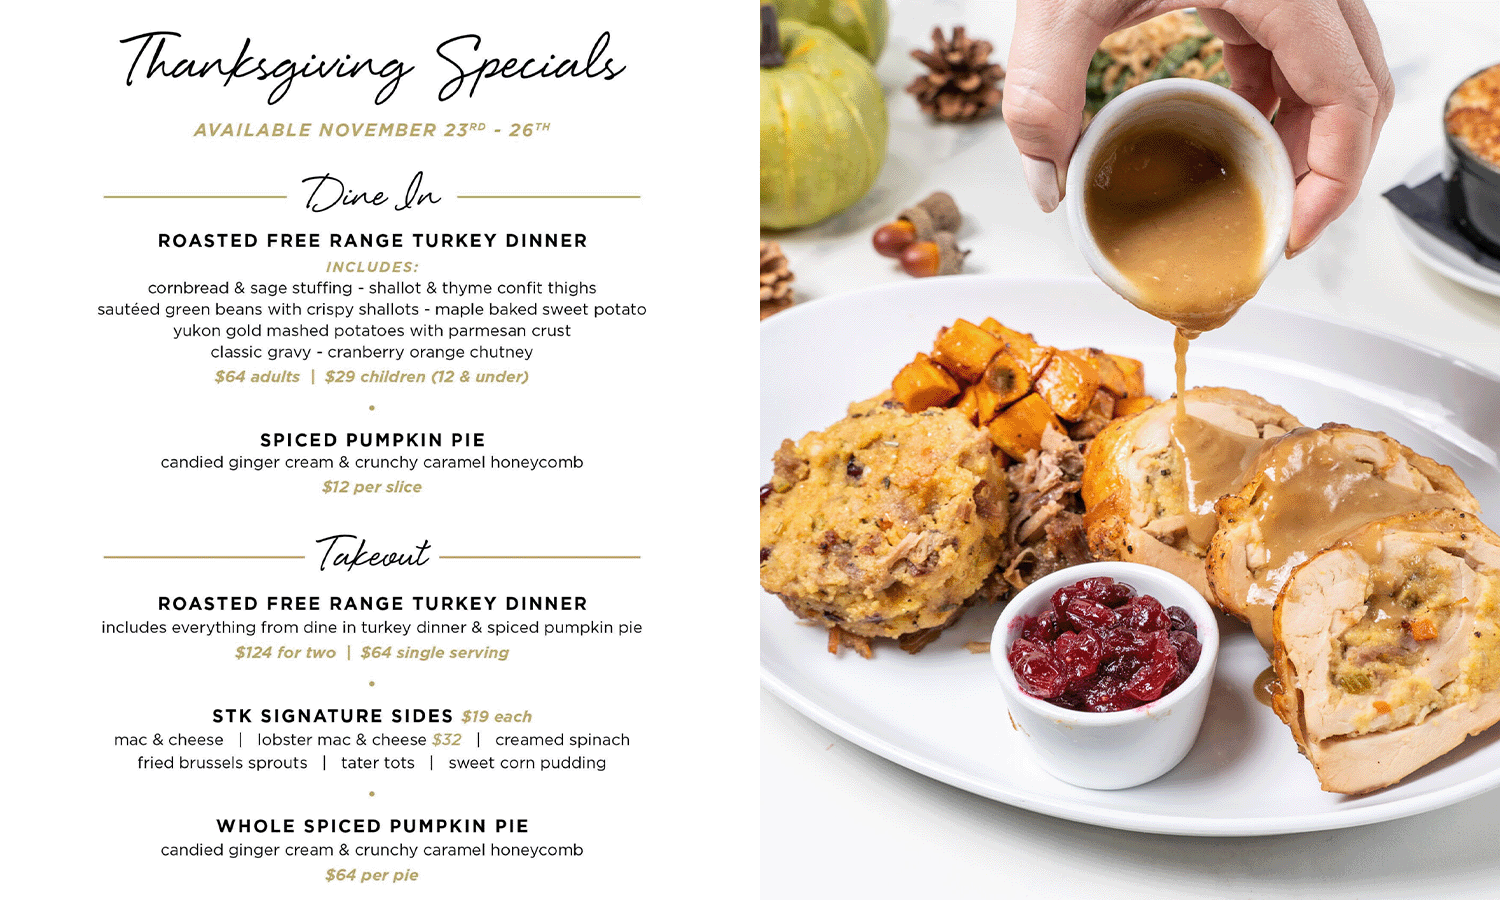 white menu with image of white plate and thanksgiving sides and gravy